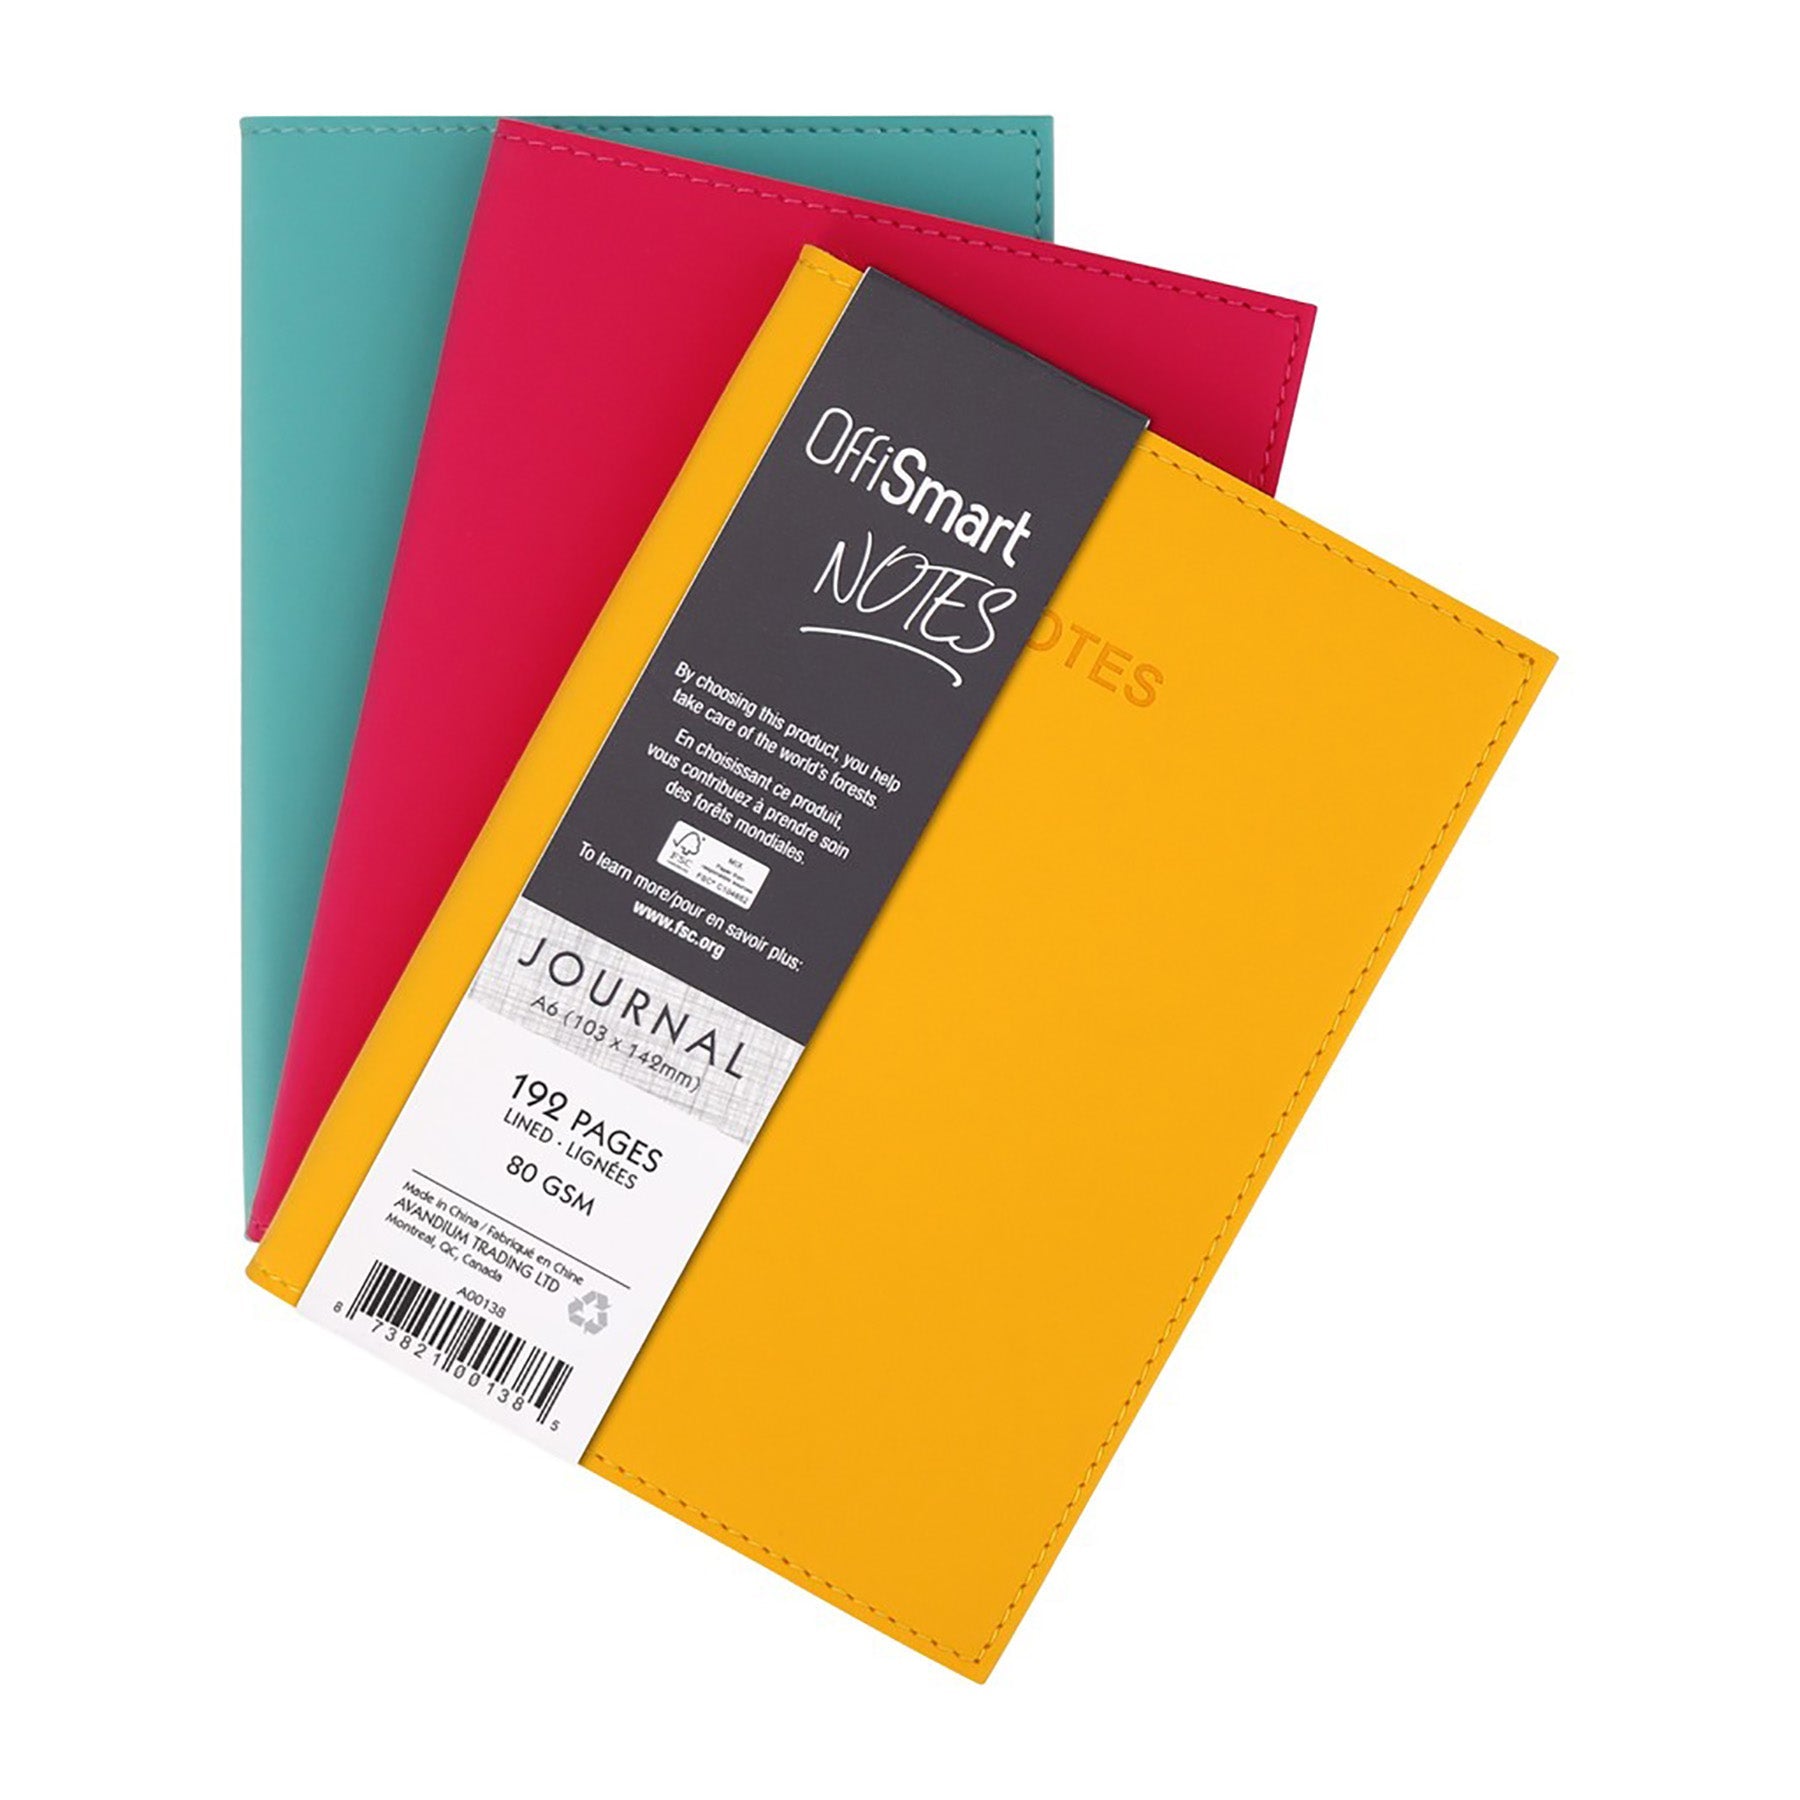 Offismart Leatherette Notebook A6 192 Lined Pages 4x6in 